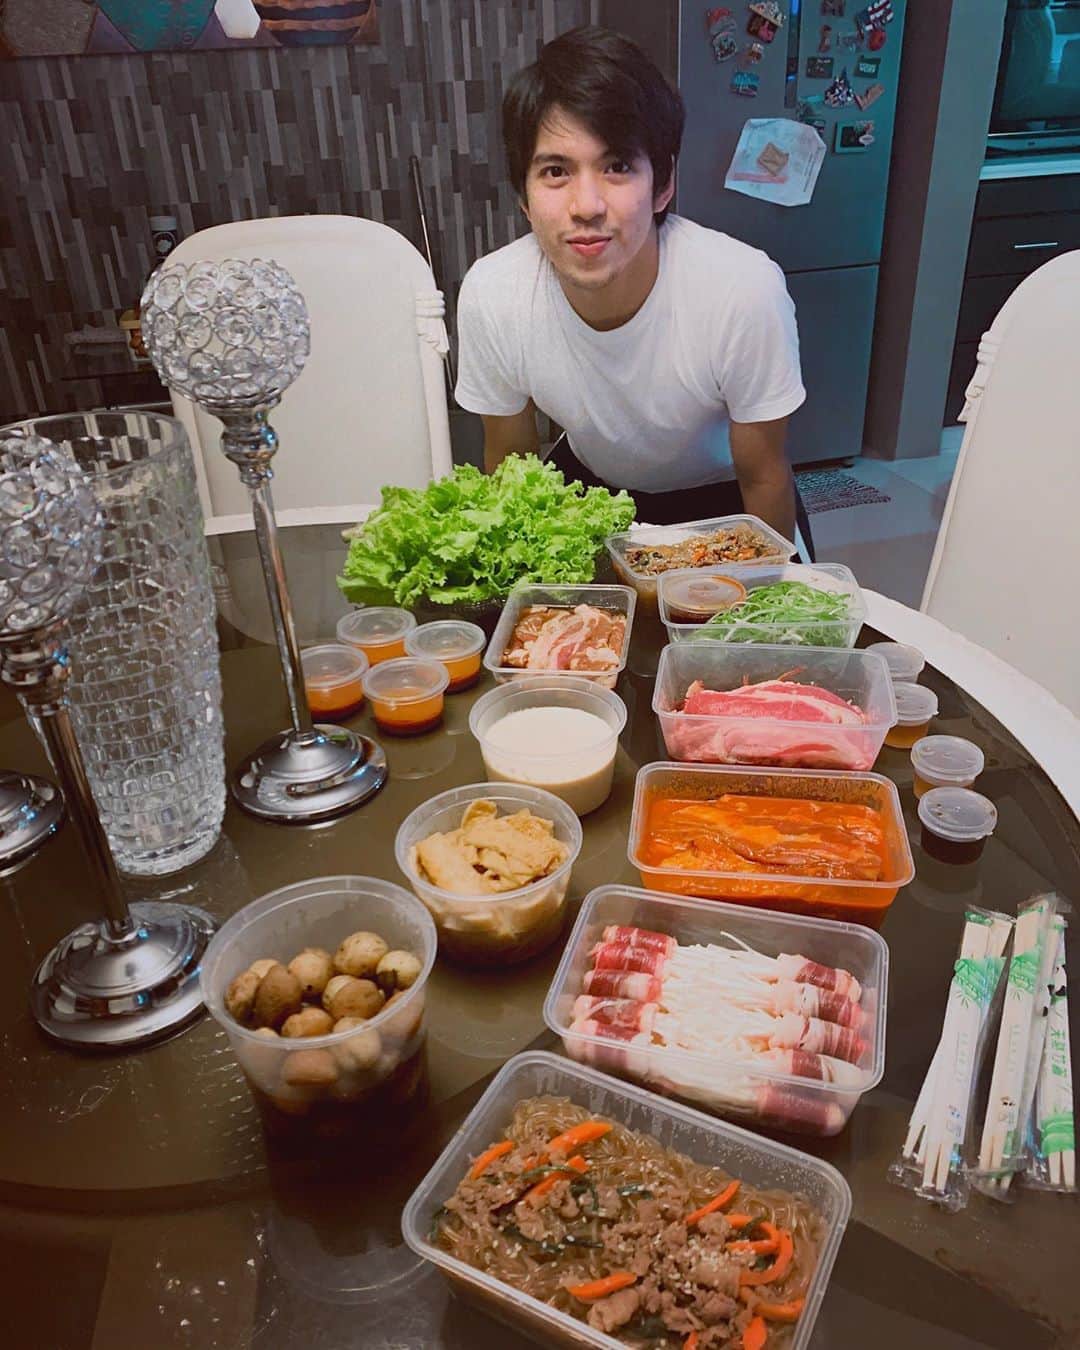 Nash Aguasのインスタグラム：「Solid to. Super sarap!  Thank you @samgyupontheway for sending delicious food! Must try👌🏻 You guys can order through their website  http://www.samgyupontheway.com」